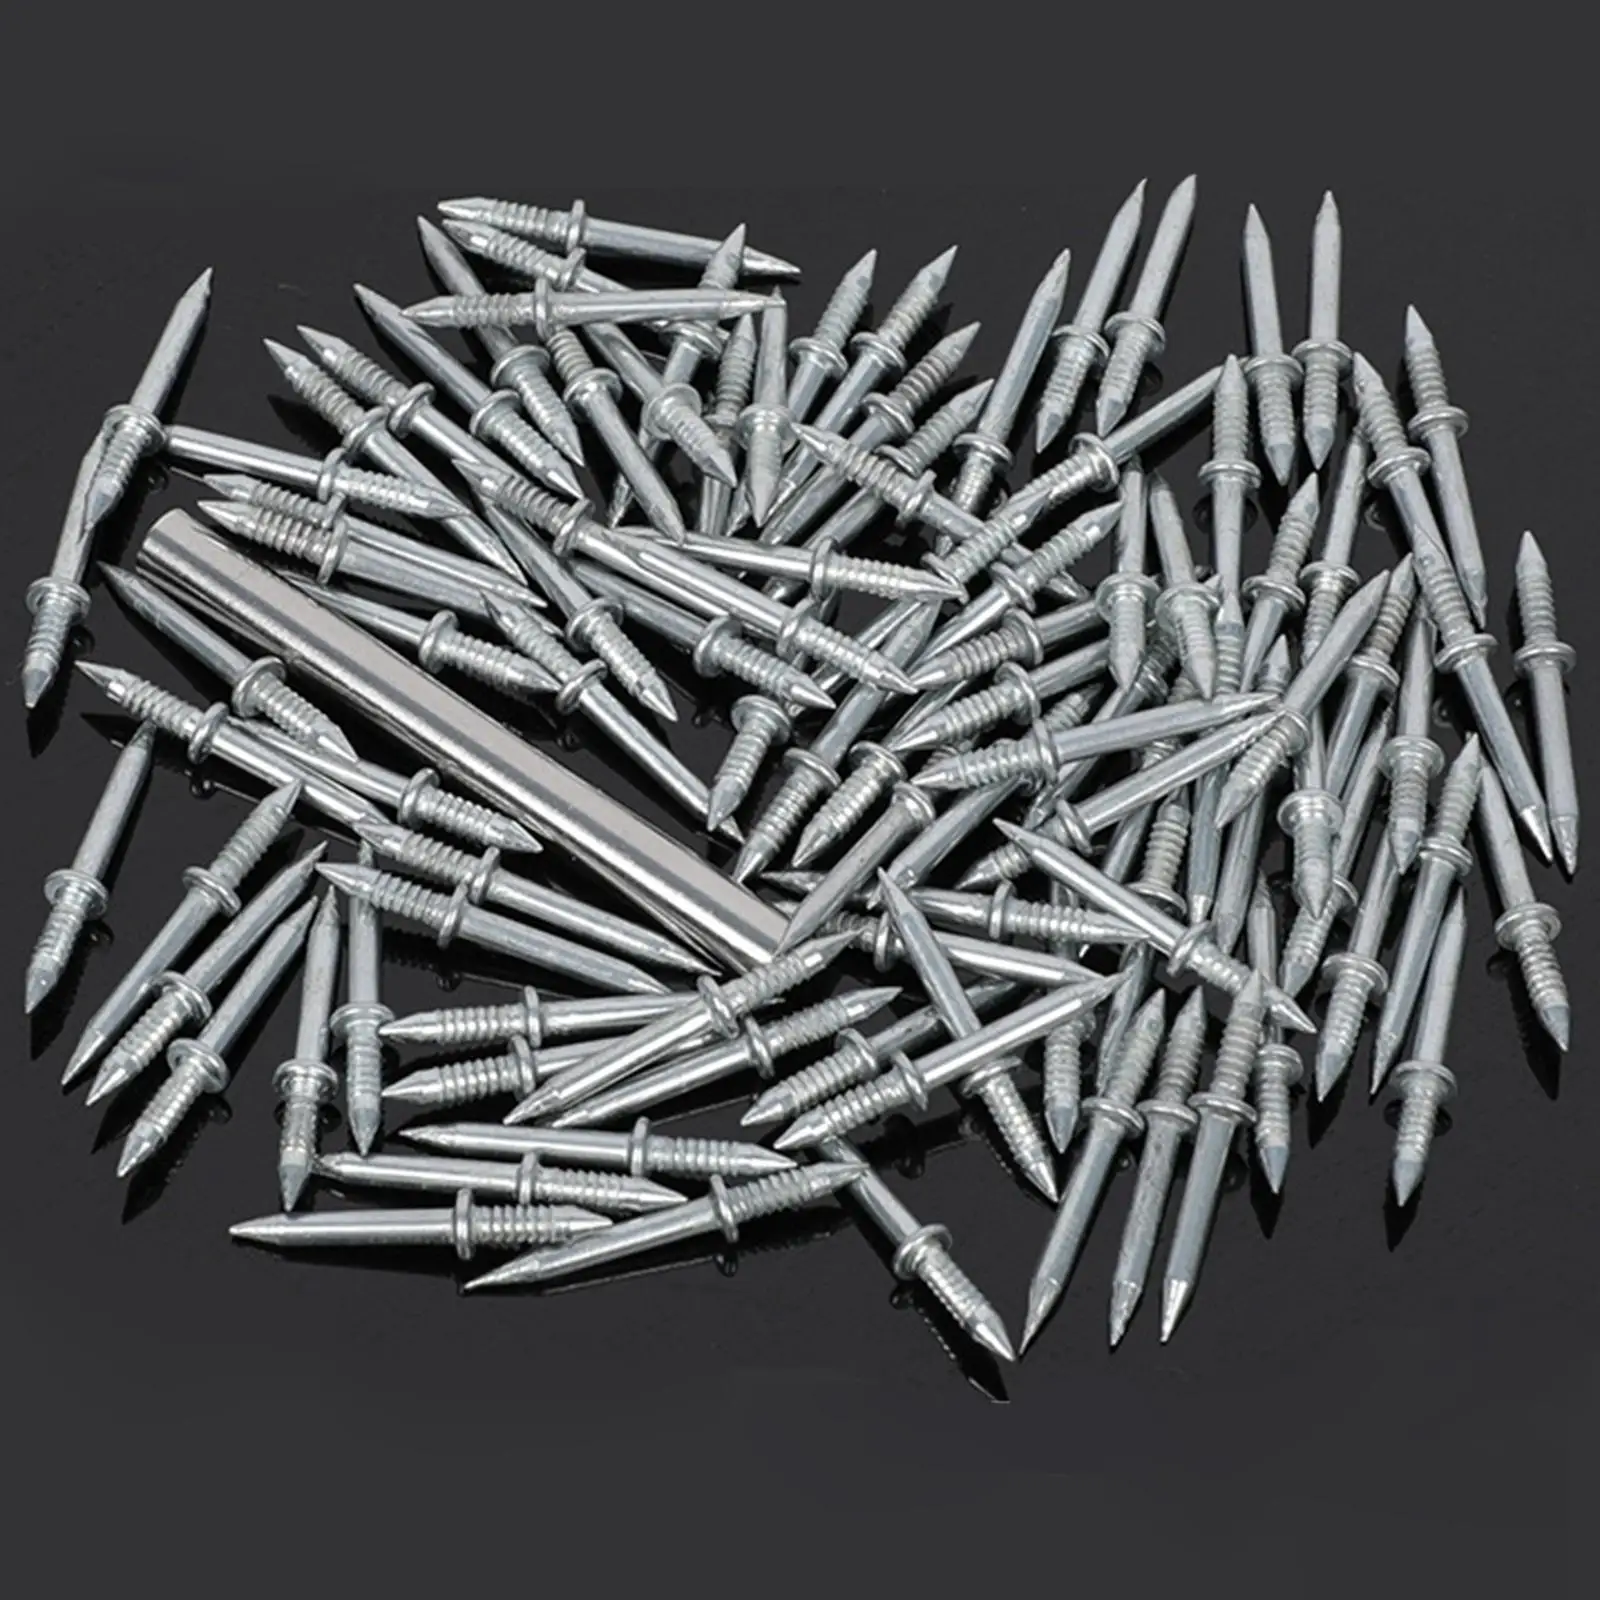 300x Double Headed Nails Headboards DIY Craft Improvement Joinery Nails